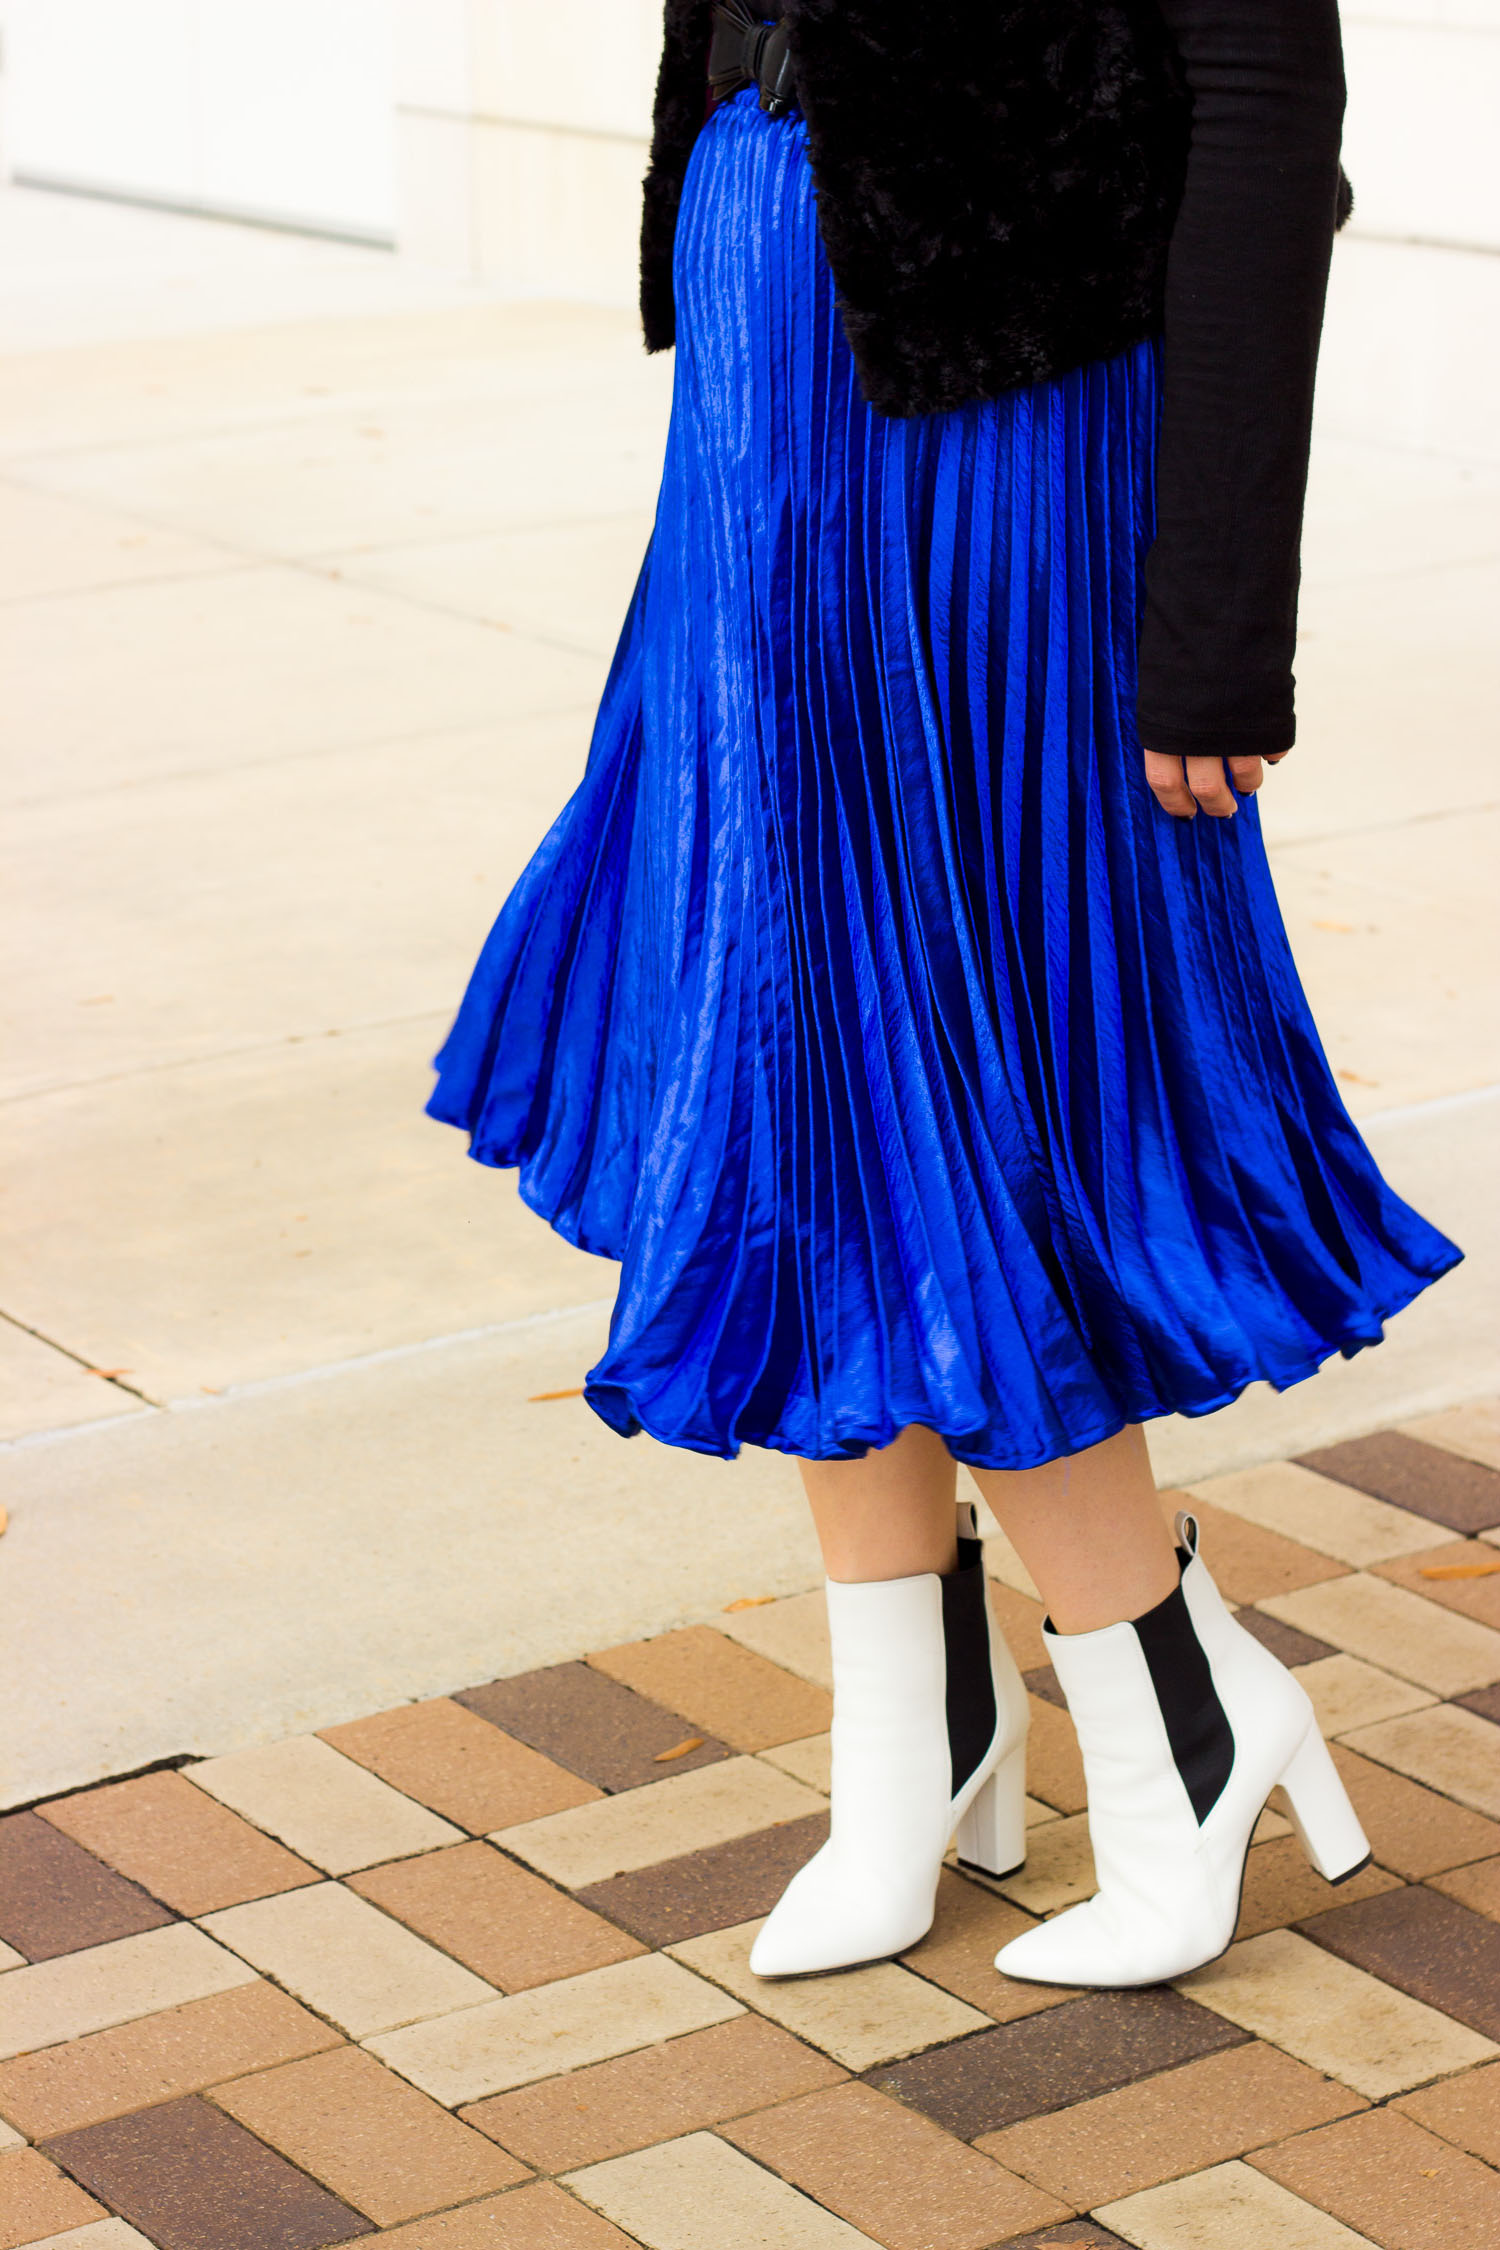 HOLIDAY OUTFIT IDEA - METALLIC PLEATED SKIRT - Belle Meets World